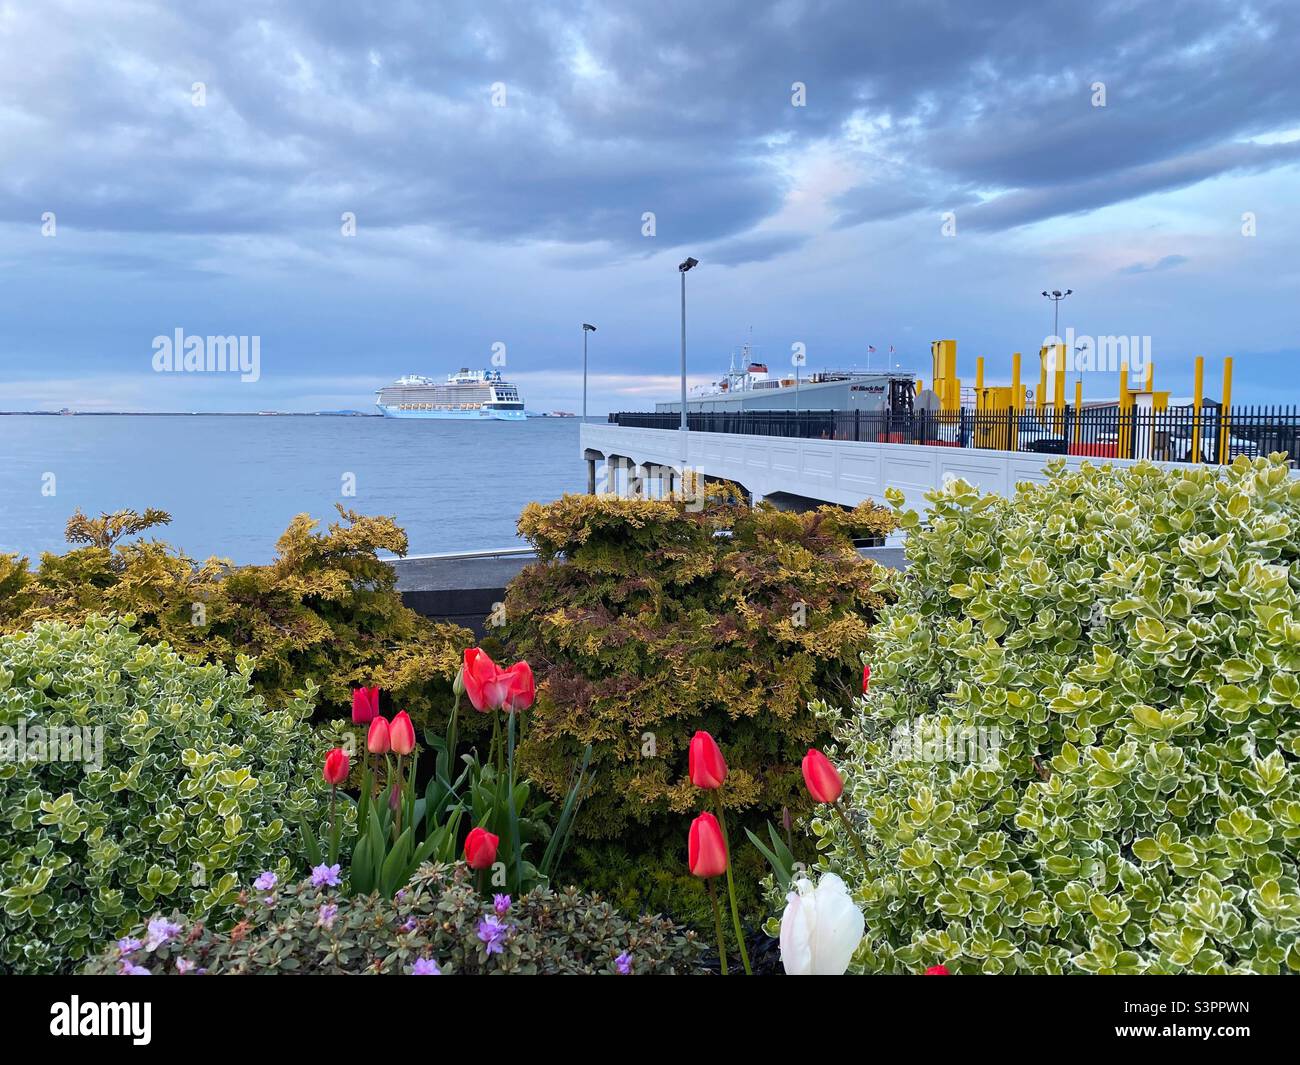 A cruise ship in the distance and spring flowers in the foreground, in Port Angeles, Washington, USA. Stock Photo